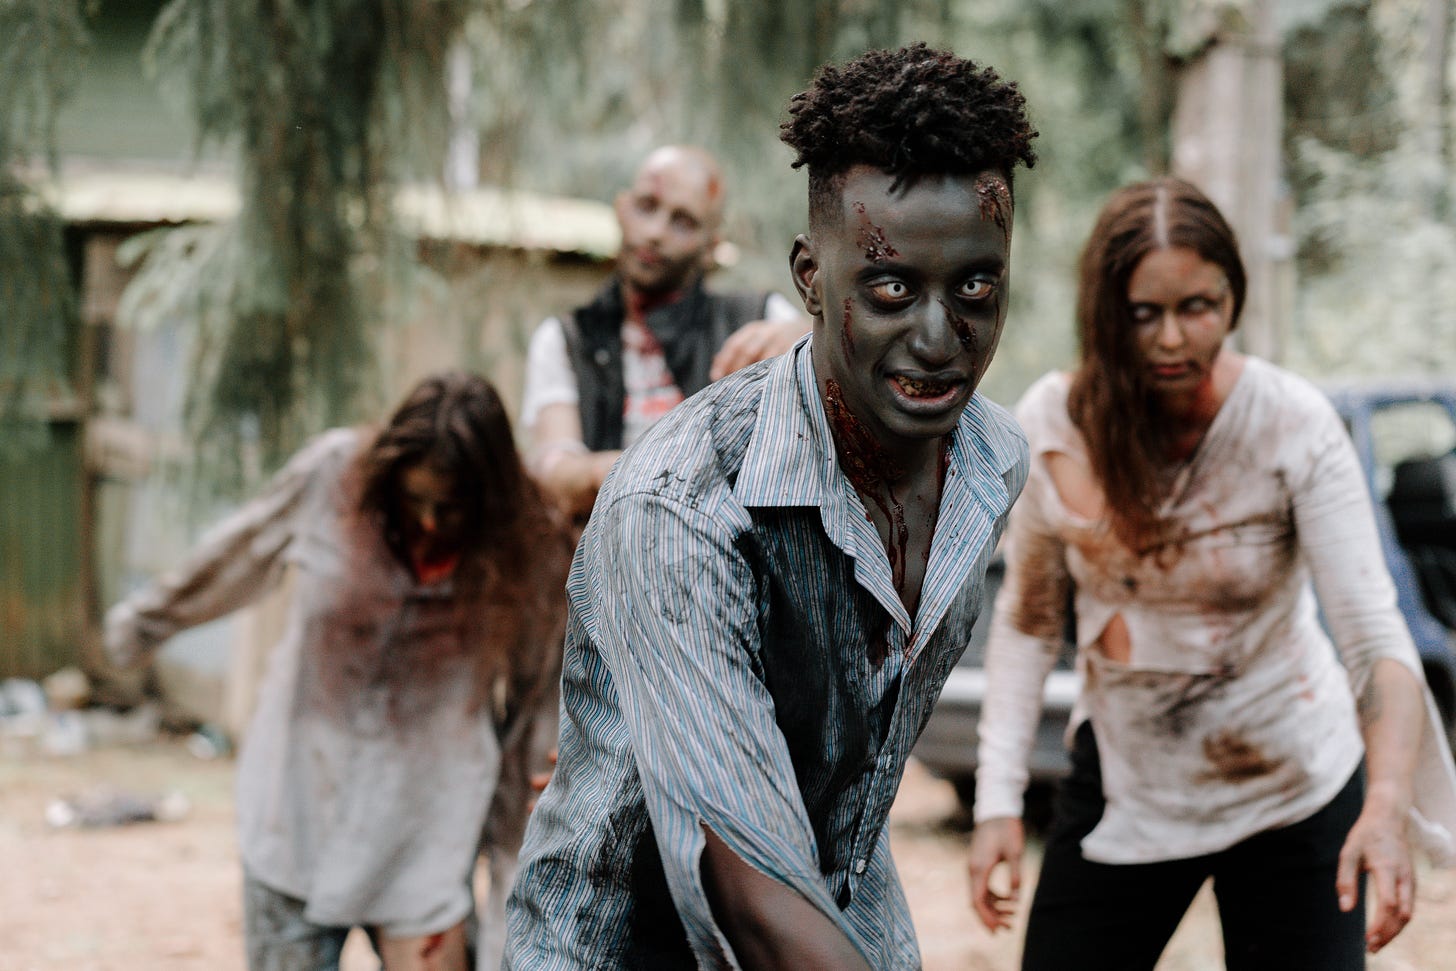 A photograph of a group of zombies lunging toward the camera.